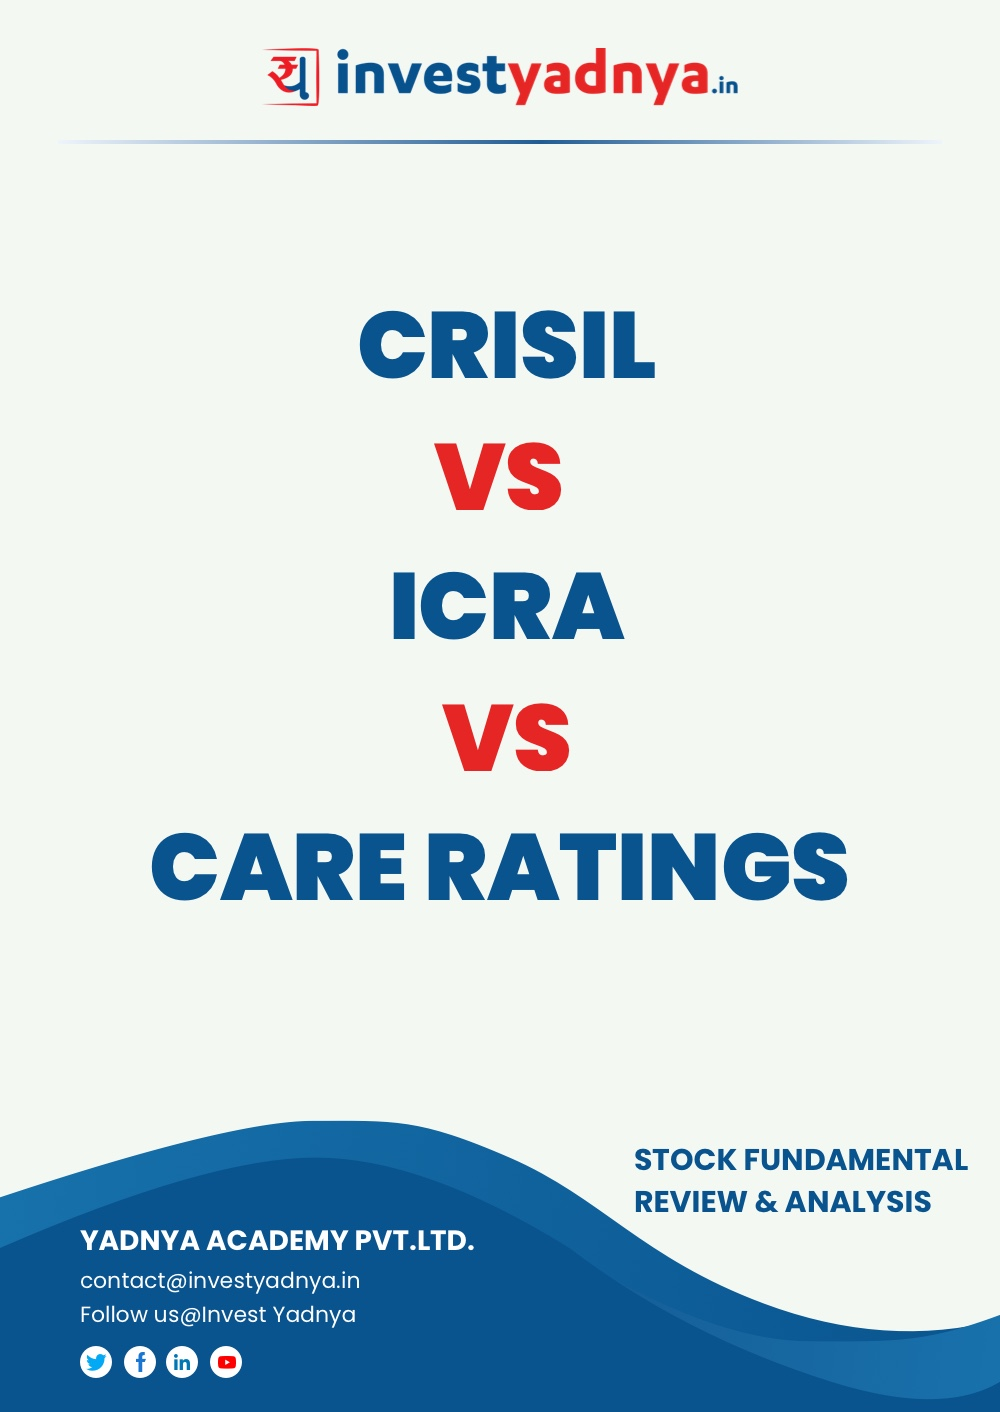 Tata Elxsi vs L&T Technology Services -  Company/Stock Review and comparison based on data till April 2021. The ebook contains a Fundamental Analysis of the companies considering both Quantitative (Financial) and Qualitative Parameters. CRISIL Vs. ICRA Vs. CARE RATINGS are the Top Rating Agencies Companies in India.